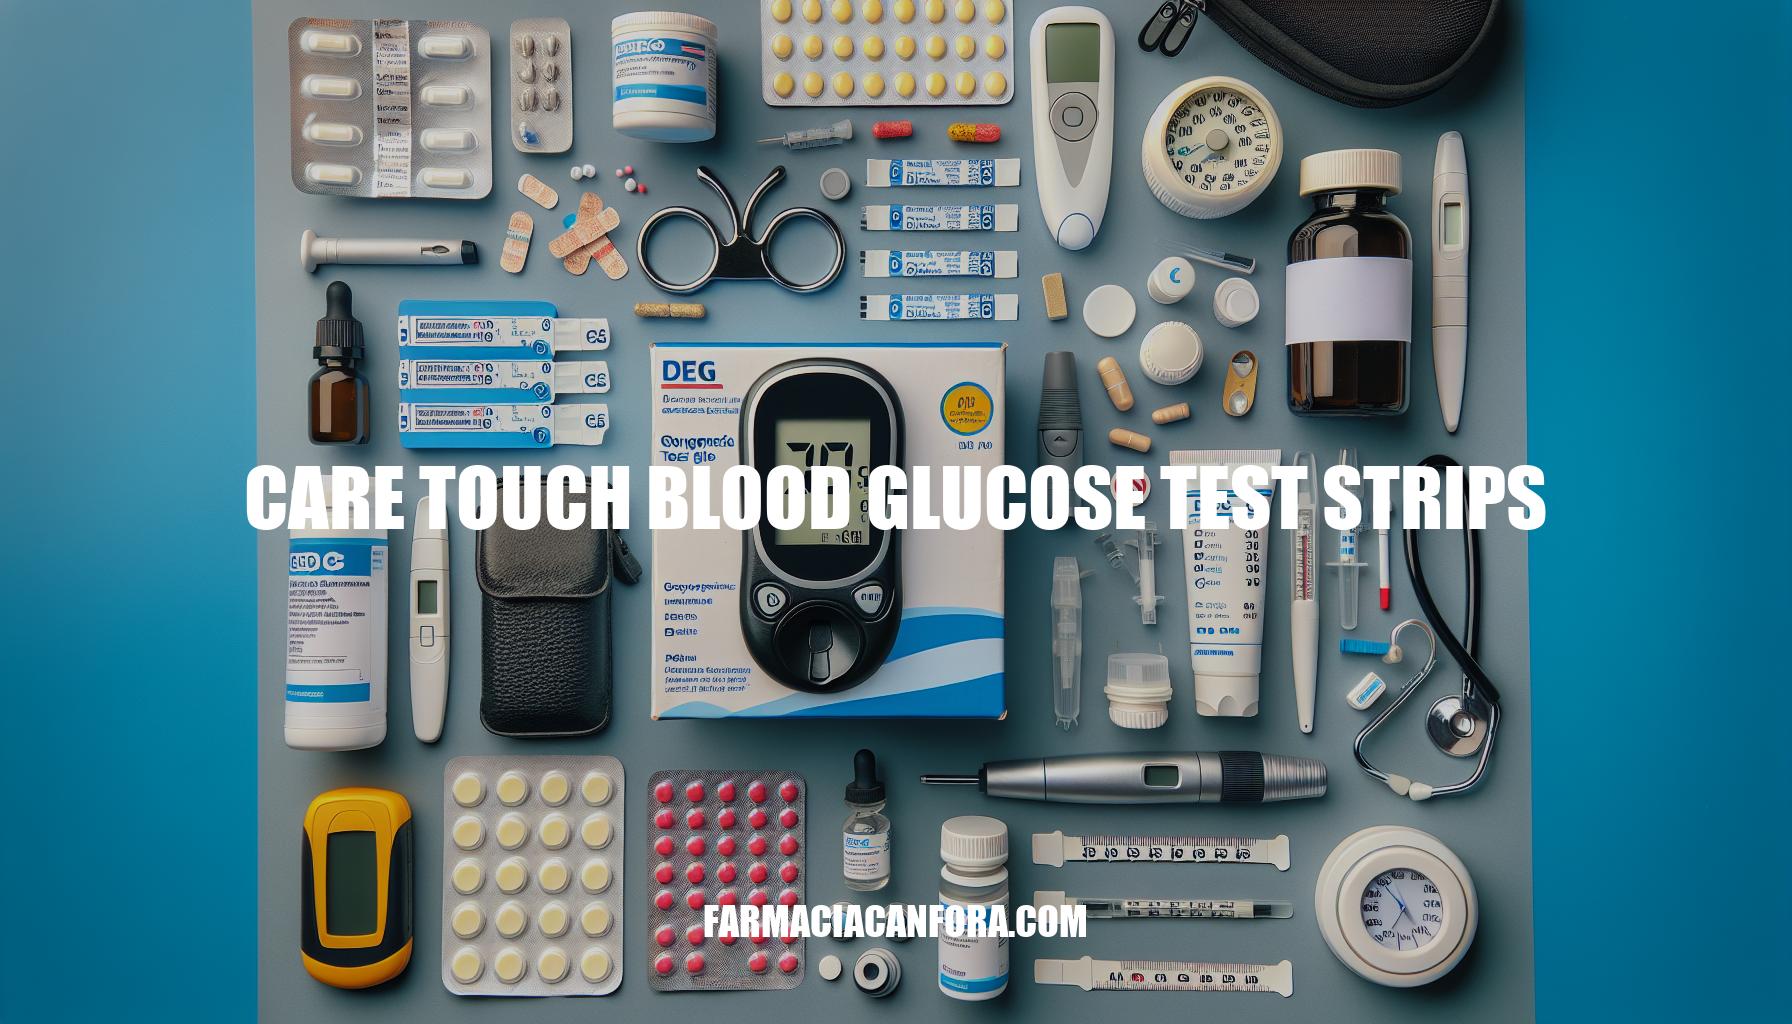 All You Need to Know About Care Touch Blood Glucose Test Strips